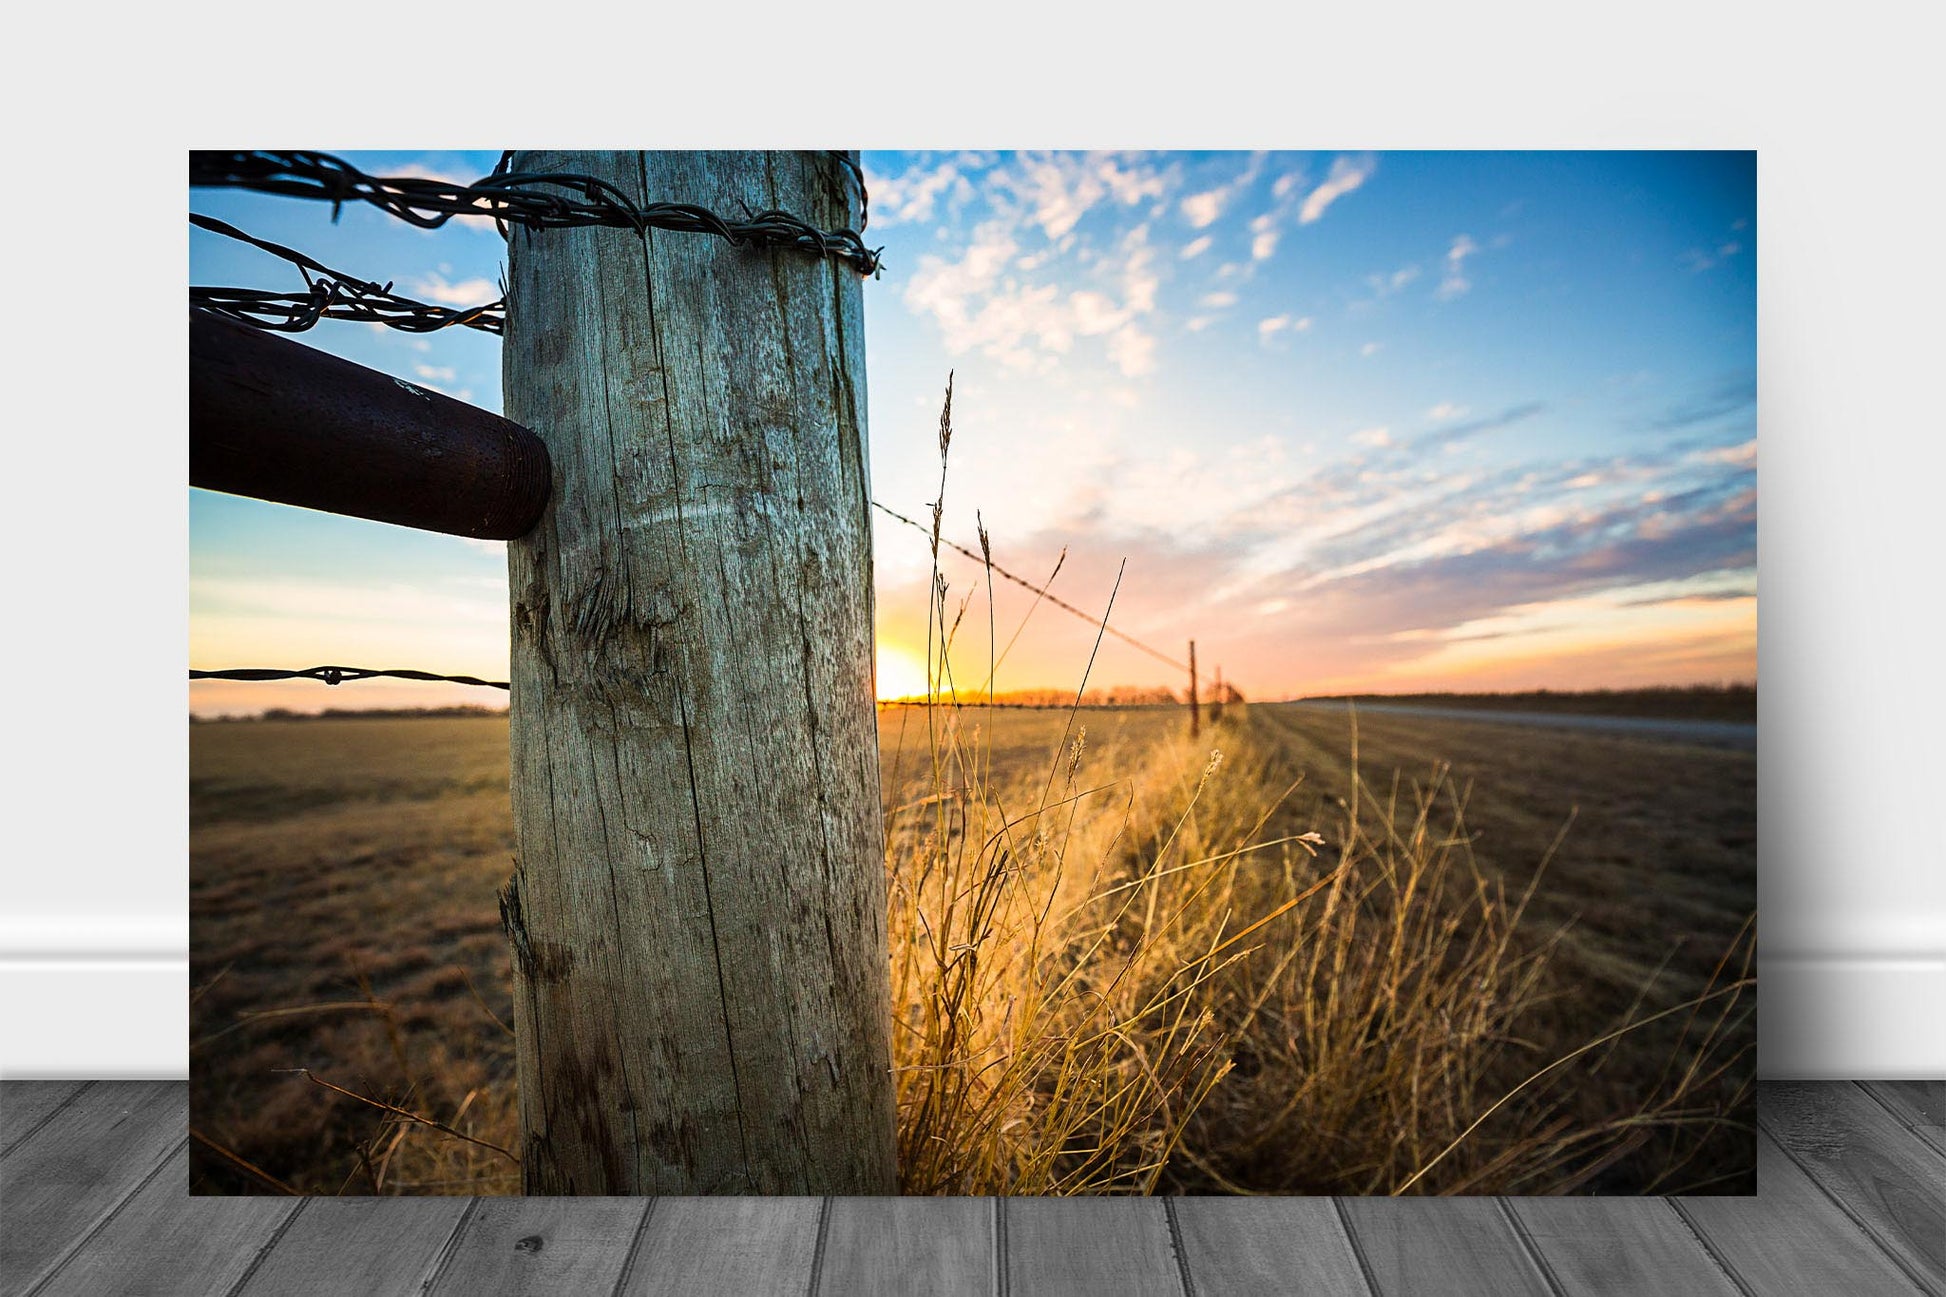 Country aluminum metal print wall art of a fence post and prairie grass illuminated by sunlight at sunset on a winter evening in Oklahoma by Sean Ramsey of Southern Plains Photography.